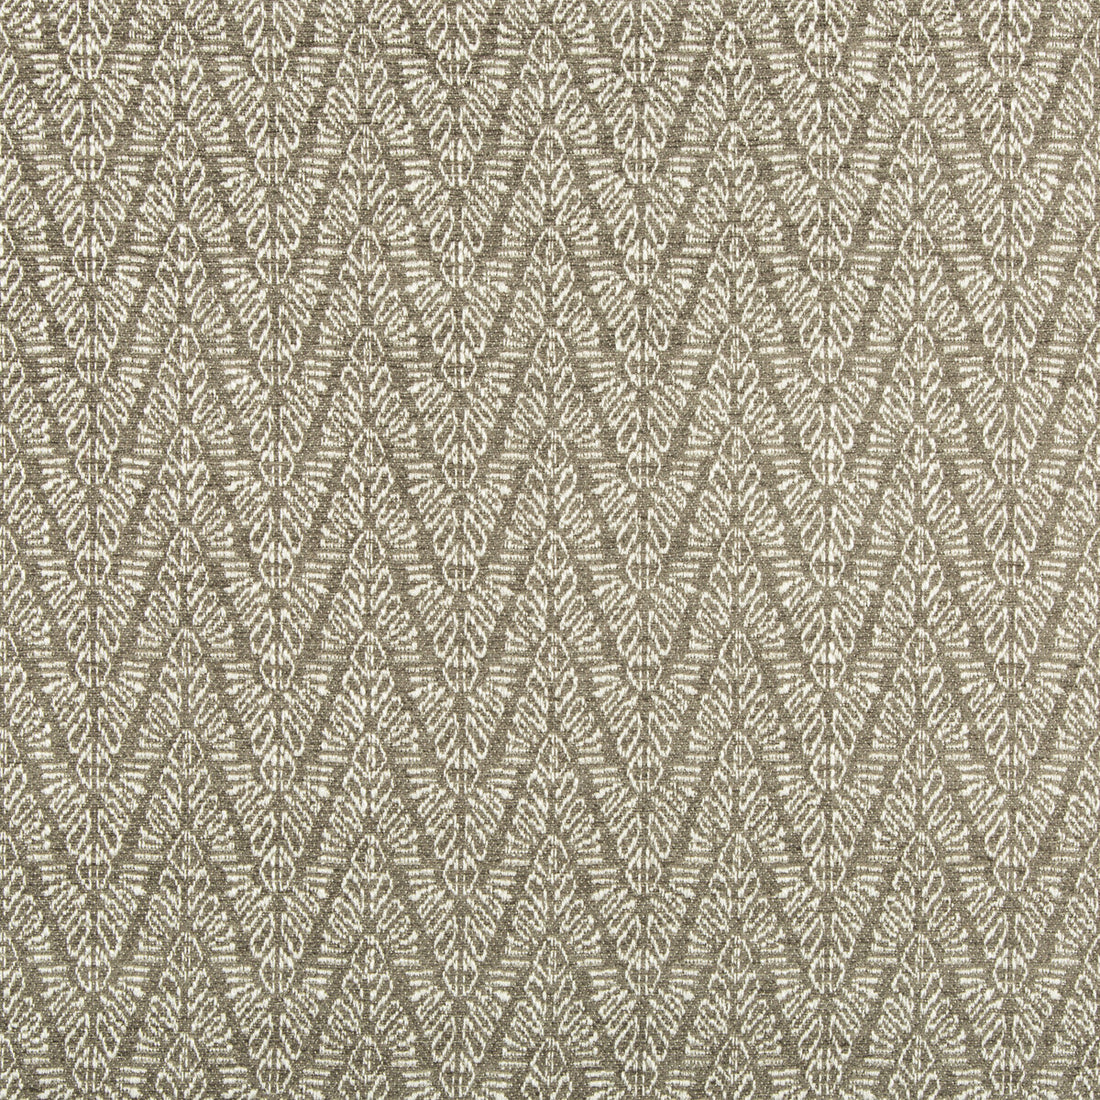 Topaz Weave fabric in silver color - pattern GWF-3750.21.0 - by Lee Jofa Modern in the Gems collection